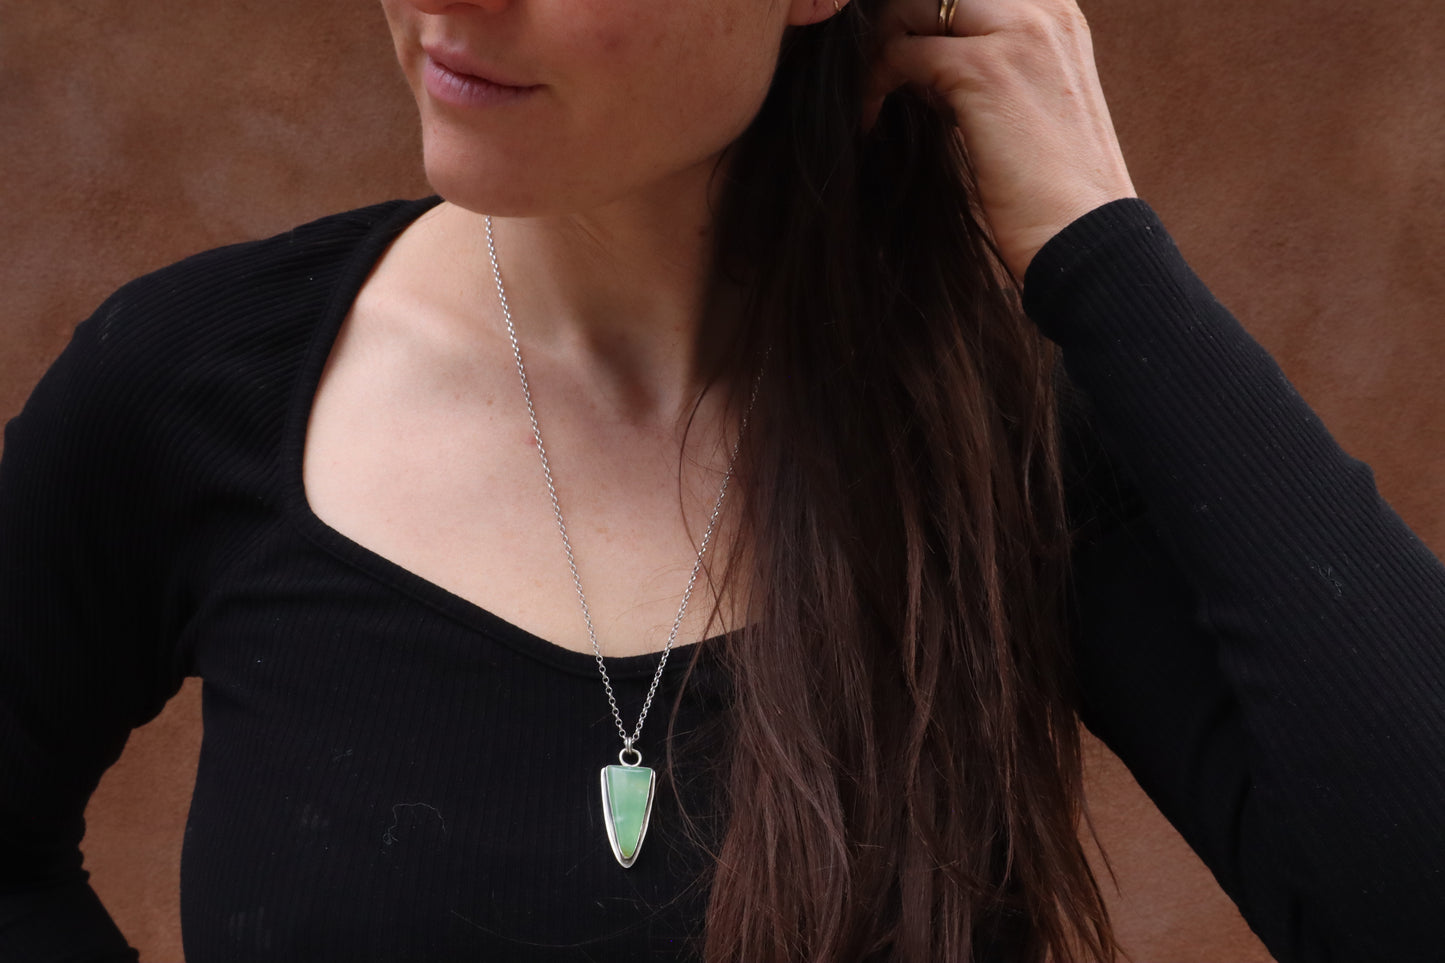 chrysoprase necklace pendant recycled silver handcrafted jewelry